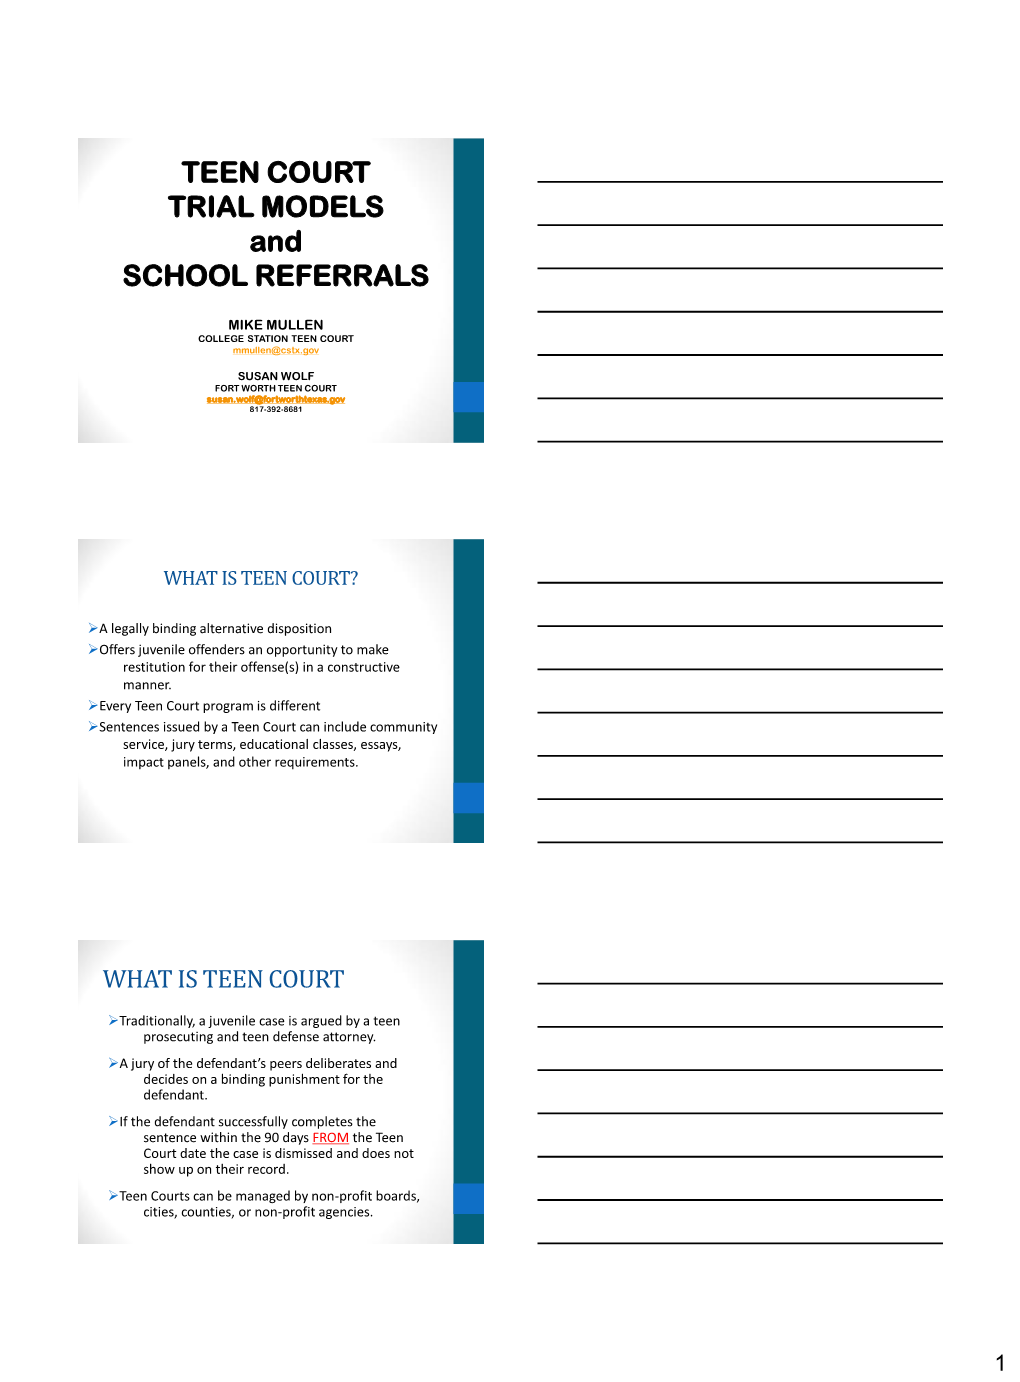 TEEN COURT TRIAL MODELS and SCHOOL REFERRALS